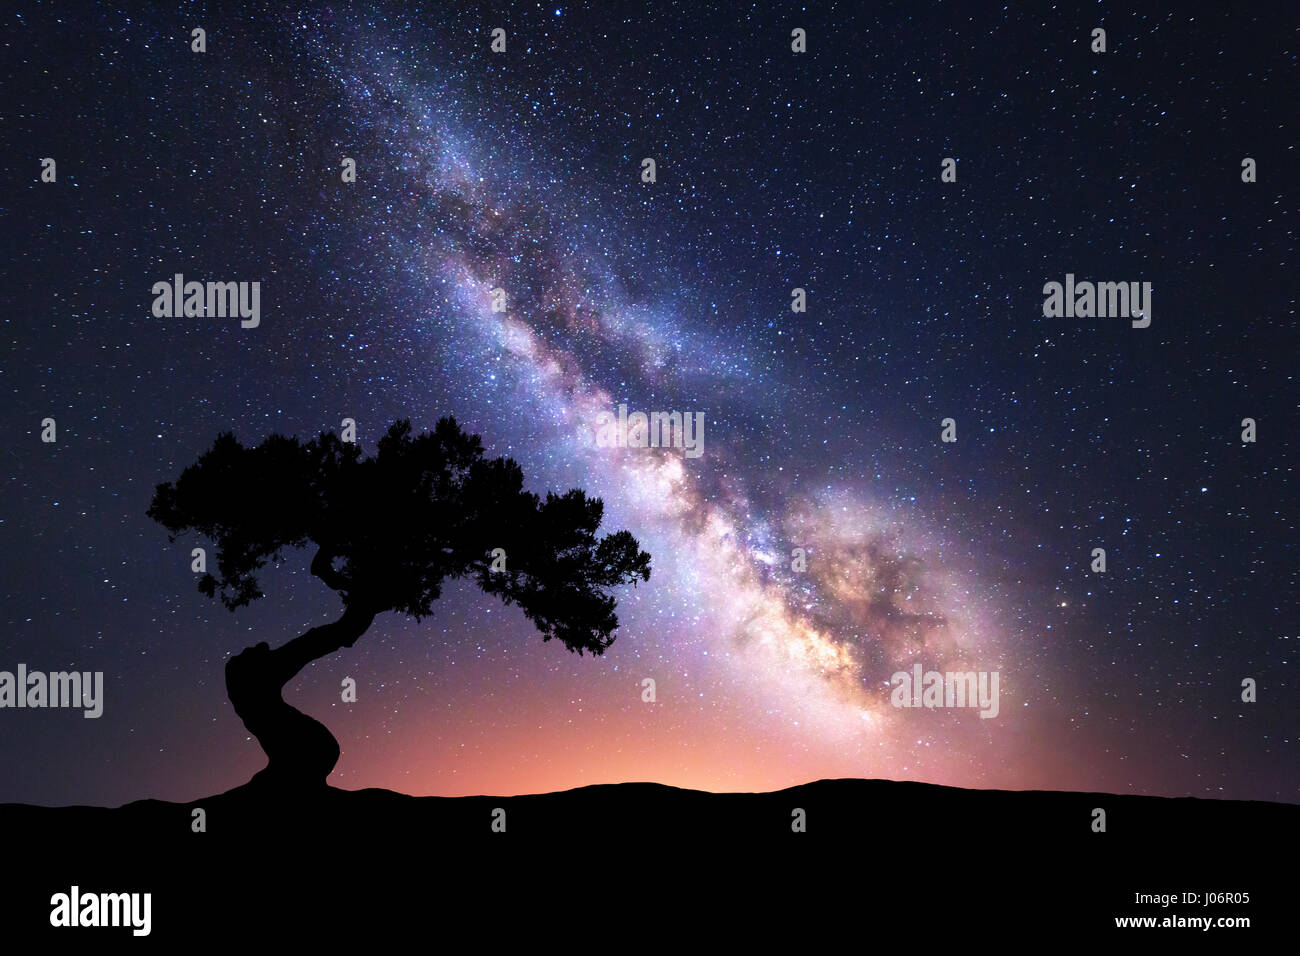 Milky Way with alone crooked tree on the hill. Colorful night landscape with bright milky way, starry sky and hills in summer. Space background. Amazi Stock Photo